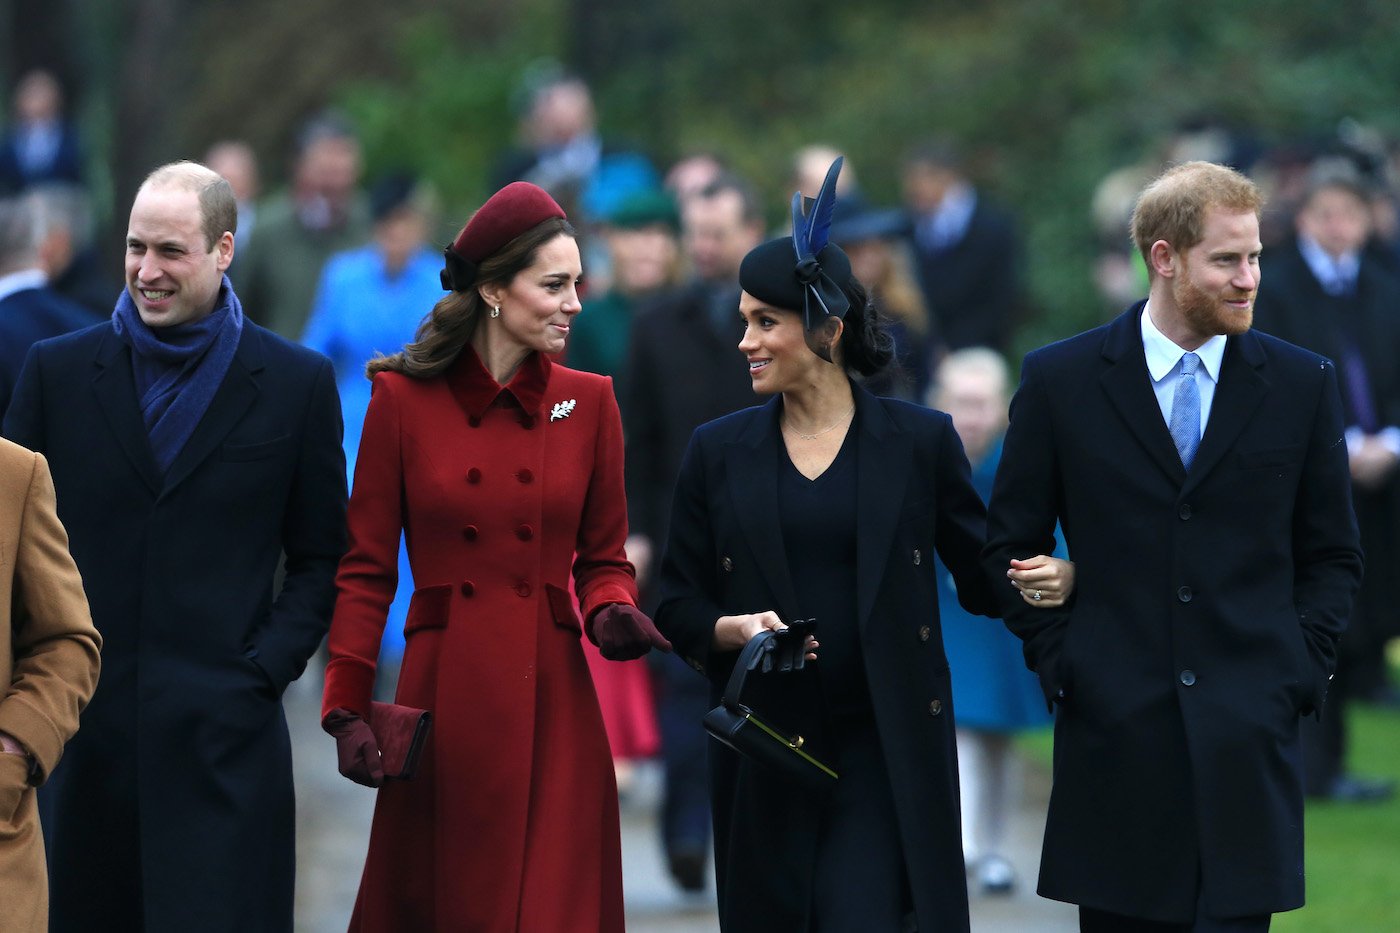 Prince William, Kate Middleton, Meghan Markle, and Prince Harry arrive for Christmas Day church service, 2018